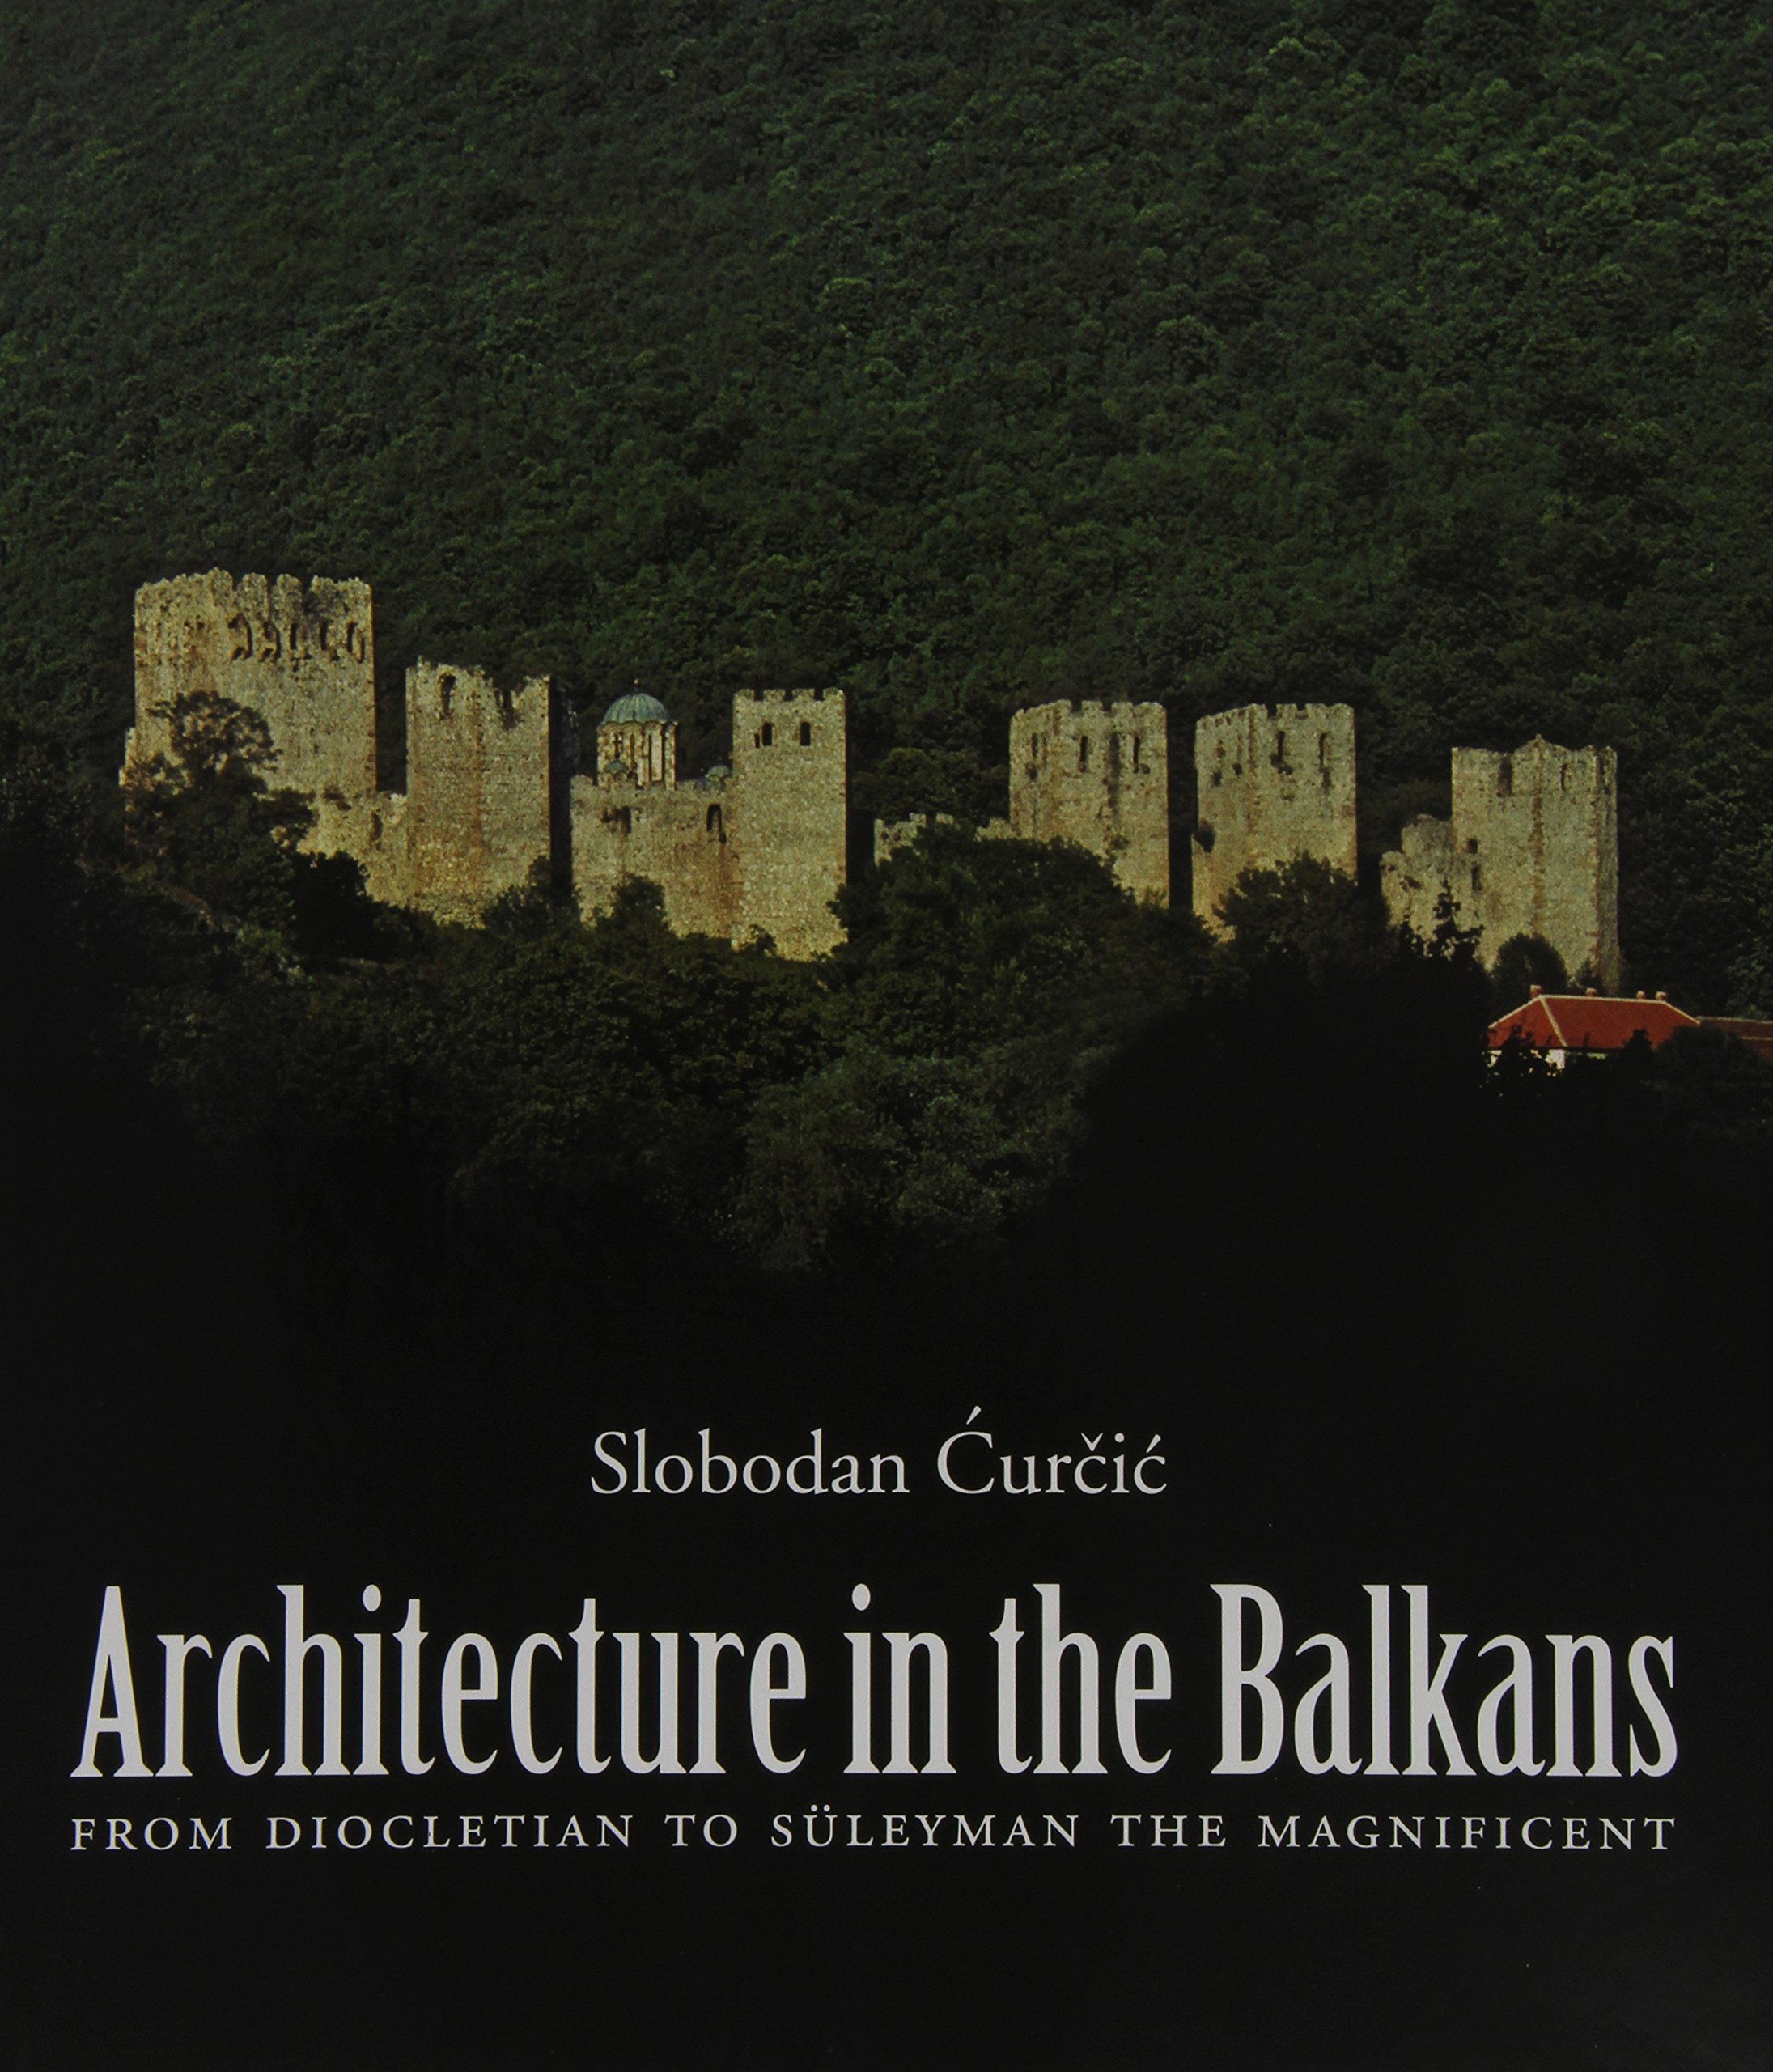 Review of S. Ćurčić, <i>Architecture in the Balkans: From Diocletian to Suleyman the Magnificent</i> (New Haven: Yale University Press, 2010), in <i>Speculum</i> 87, no. 4 (2012): 1178-1179. [V. Marinis]